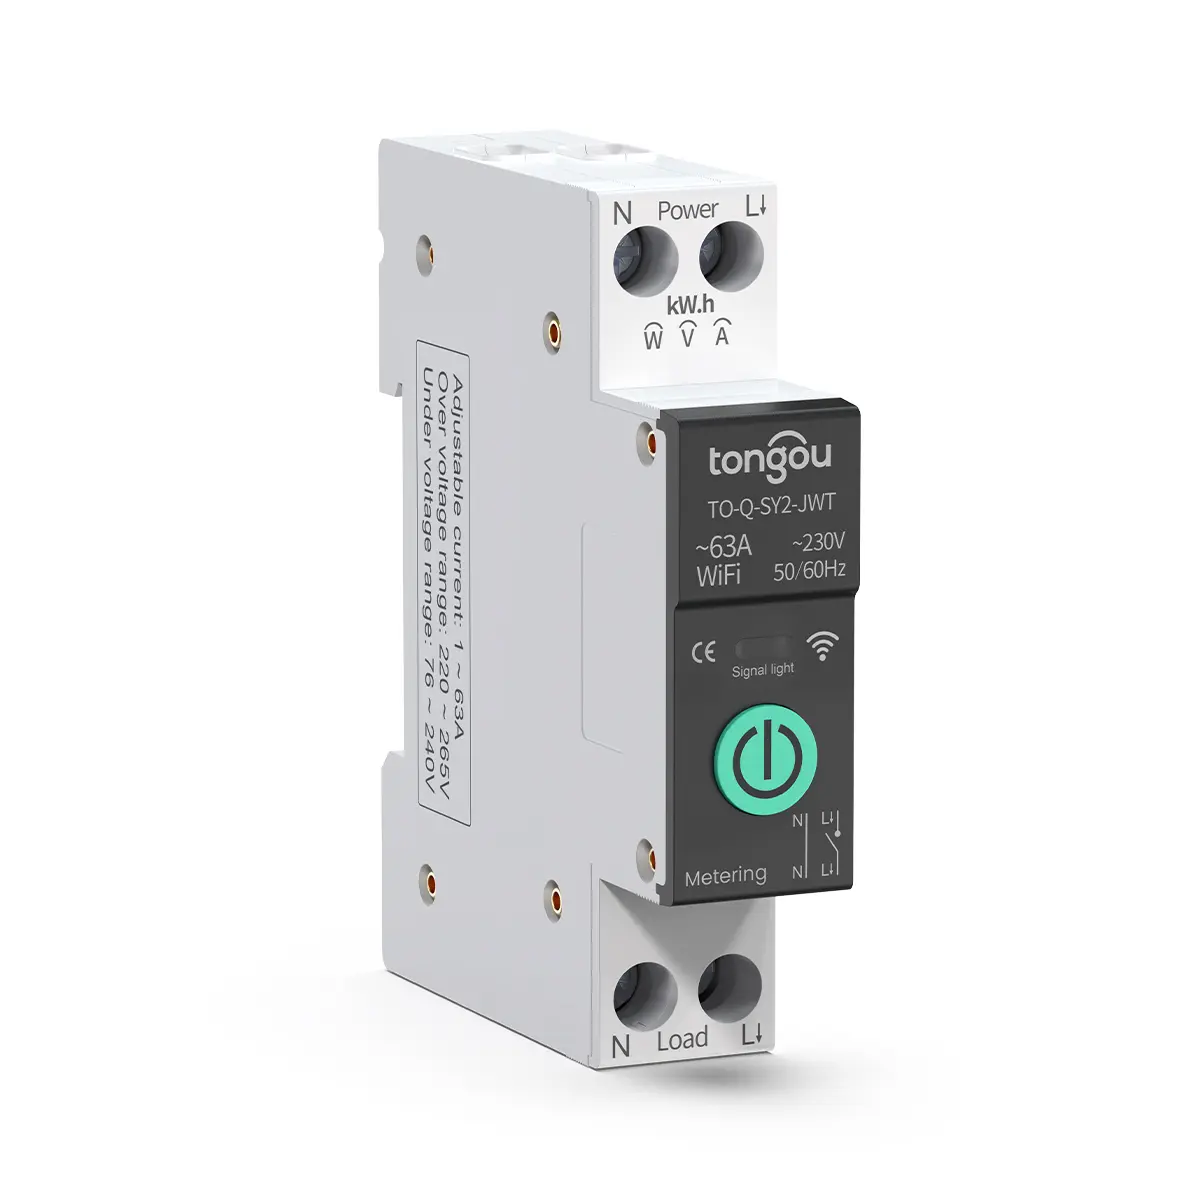 TO-Q-SY2-JWT Din Rail Smart WiFi Switch with timing metering function -  TONGOU Electrical